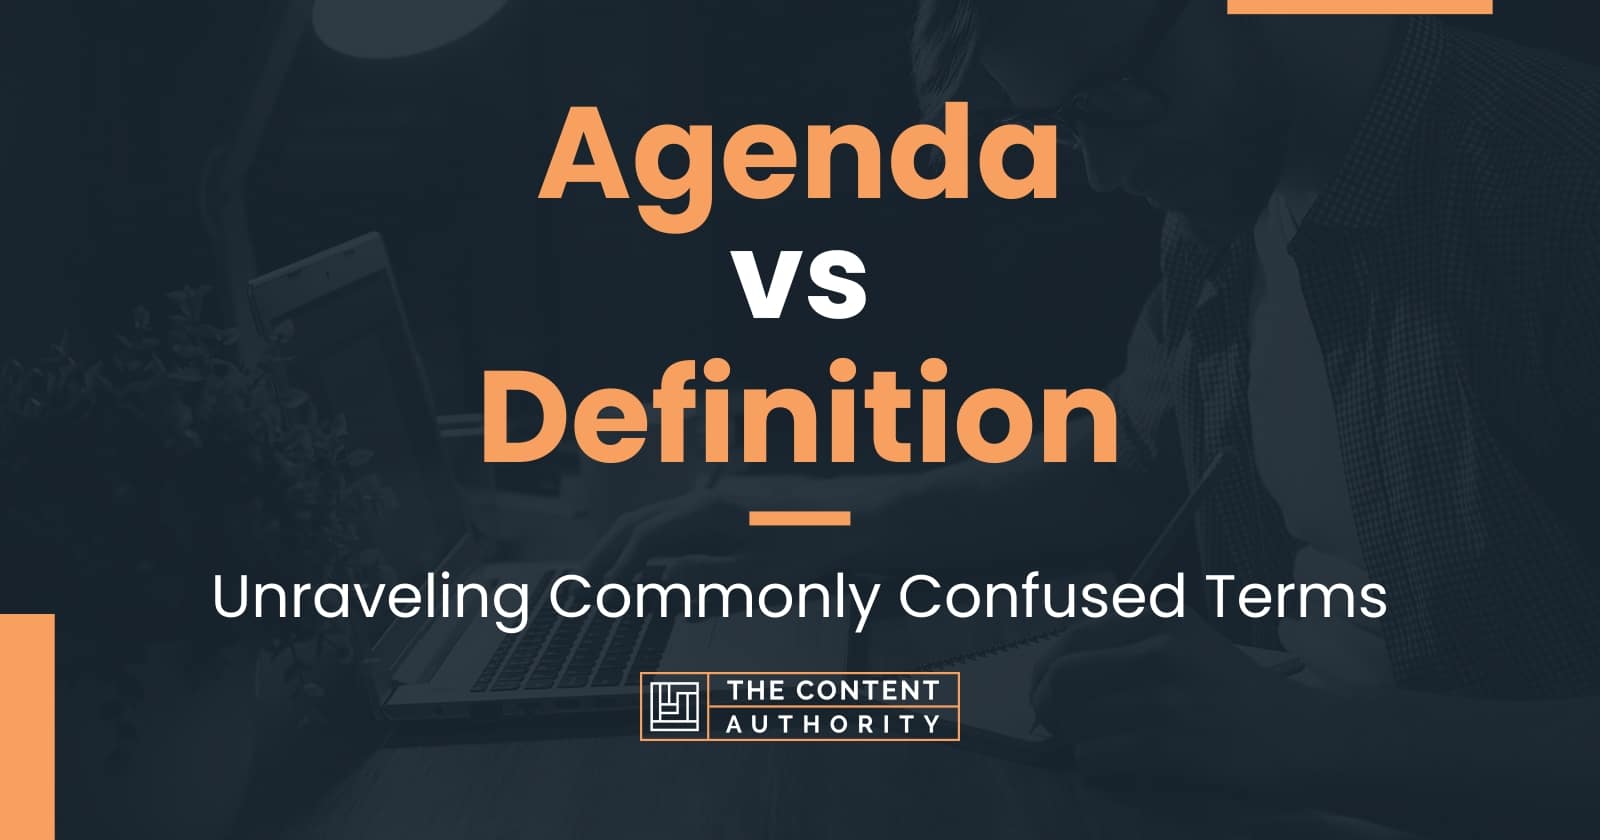 Agenda vs Definition Unraveling Commonly Confused Terms